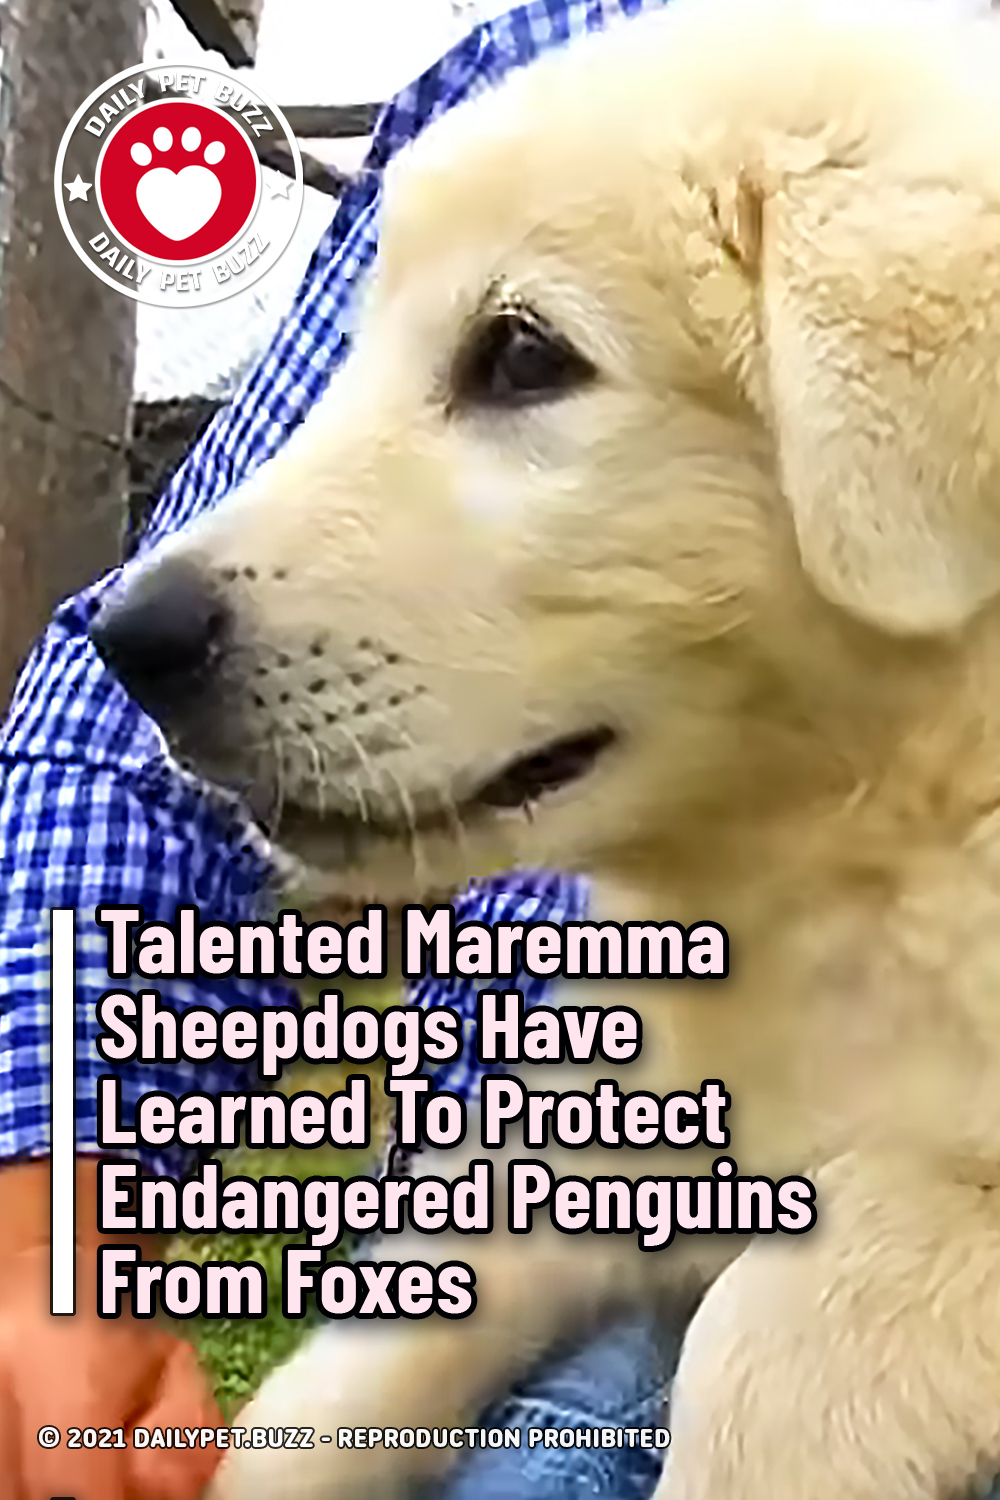 Talented Maremma Sheepdogs Have Learned To Protect Endangered Penguins From Foxes